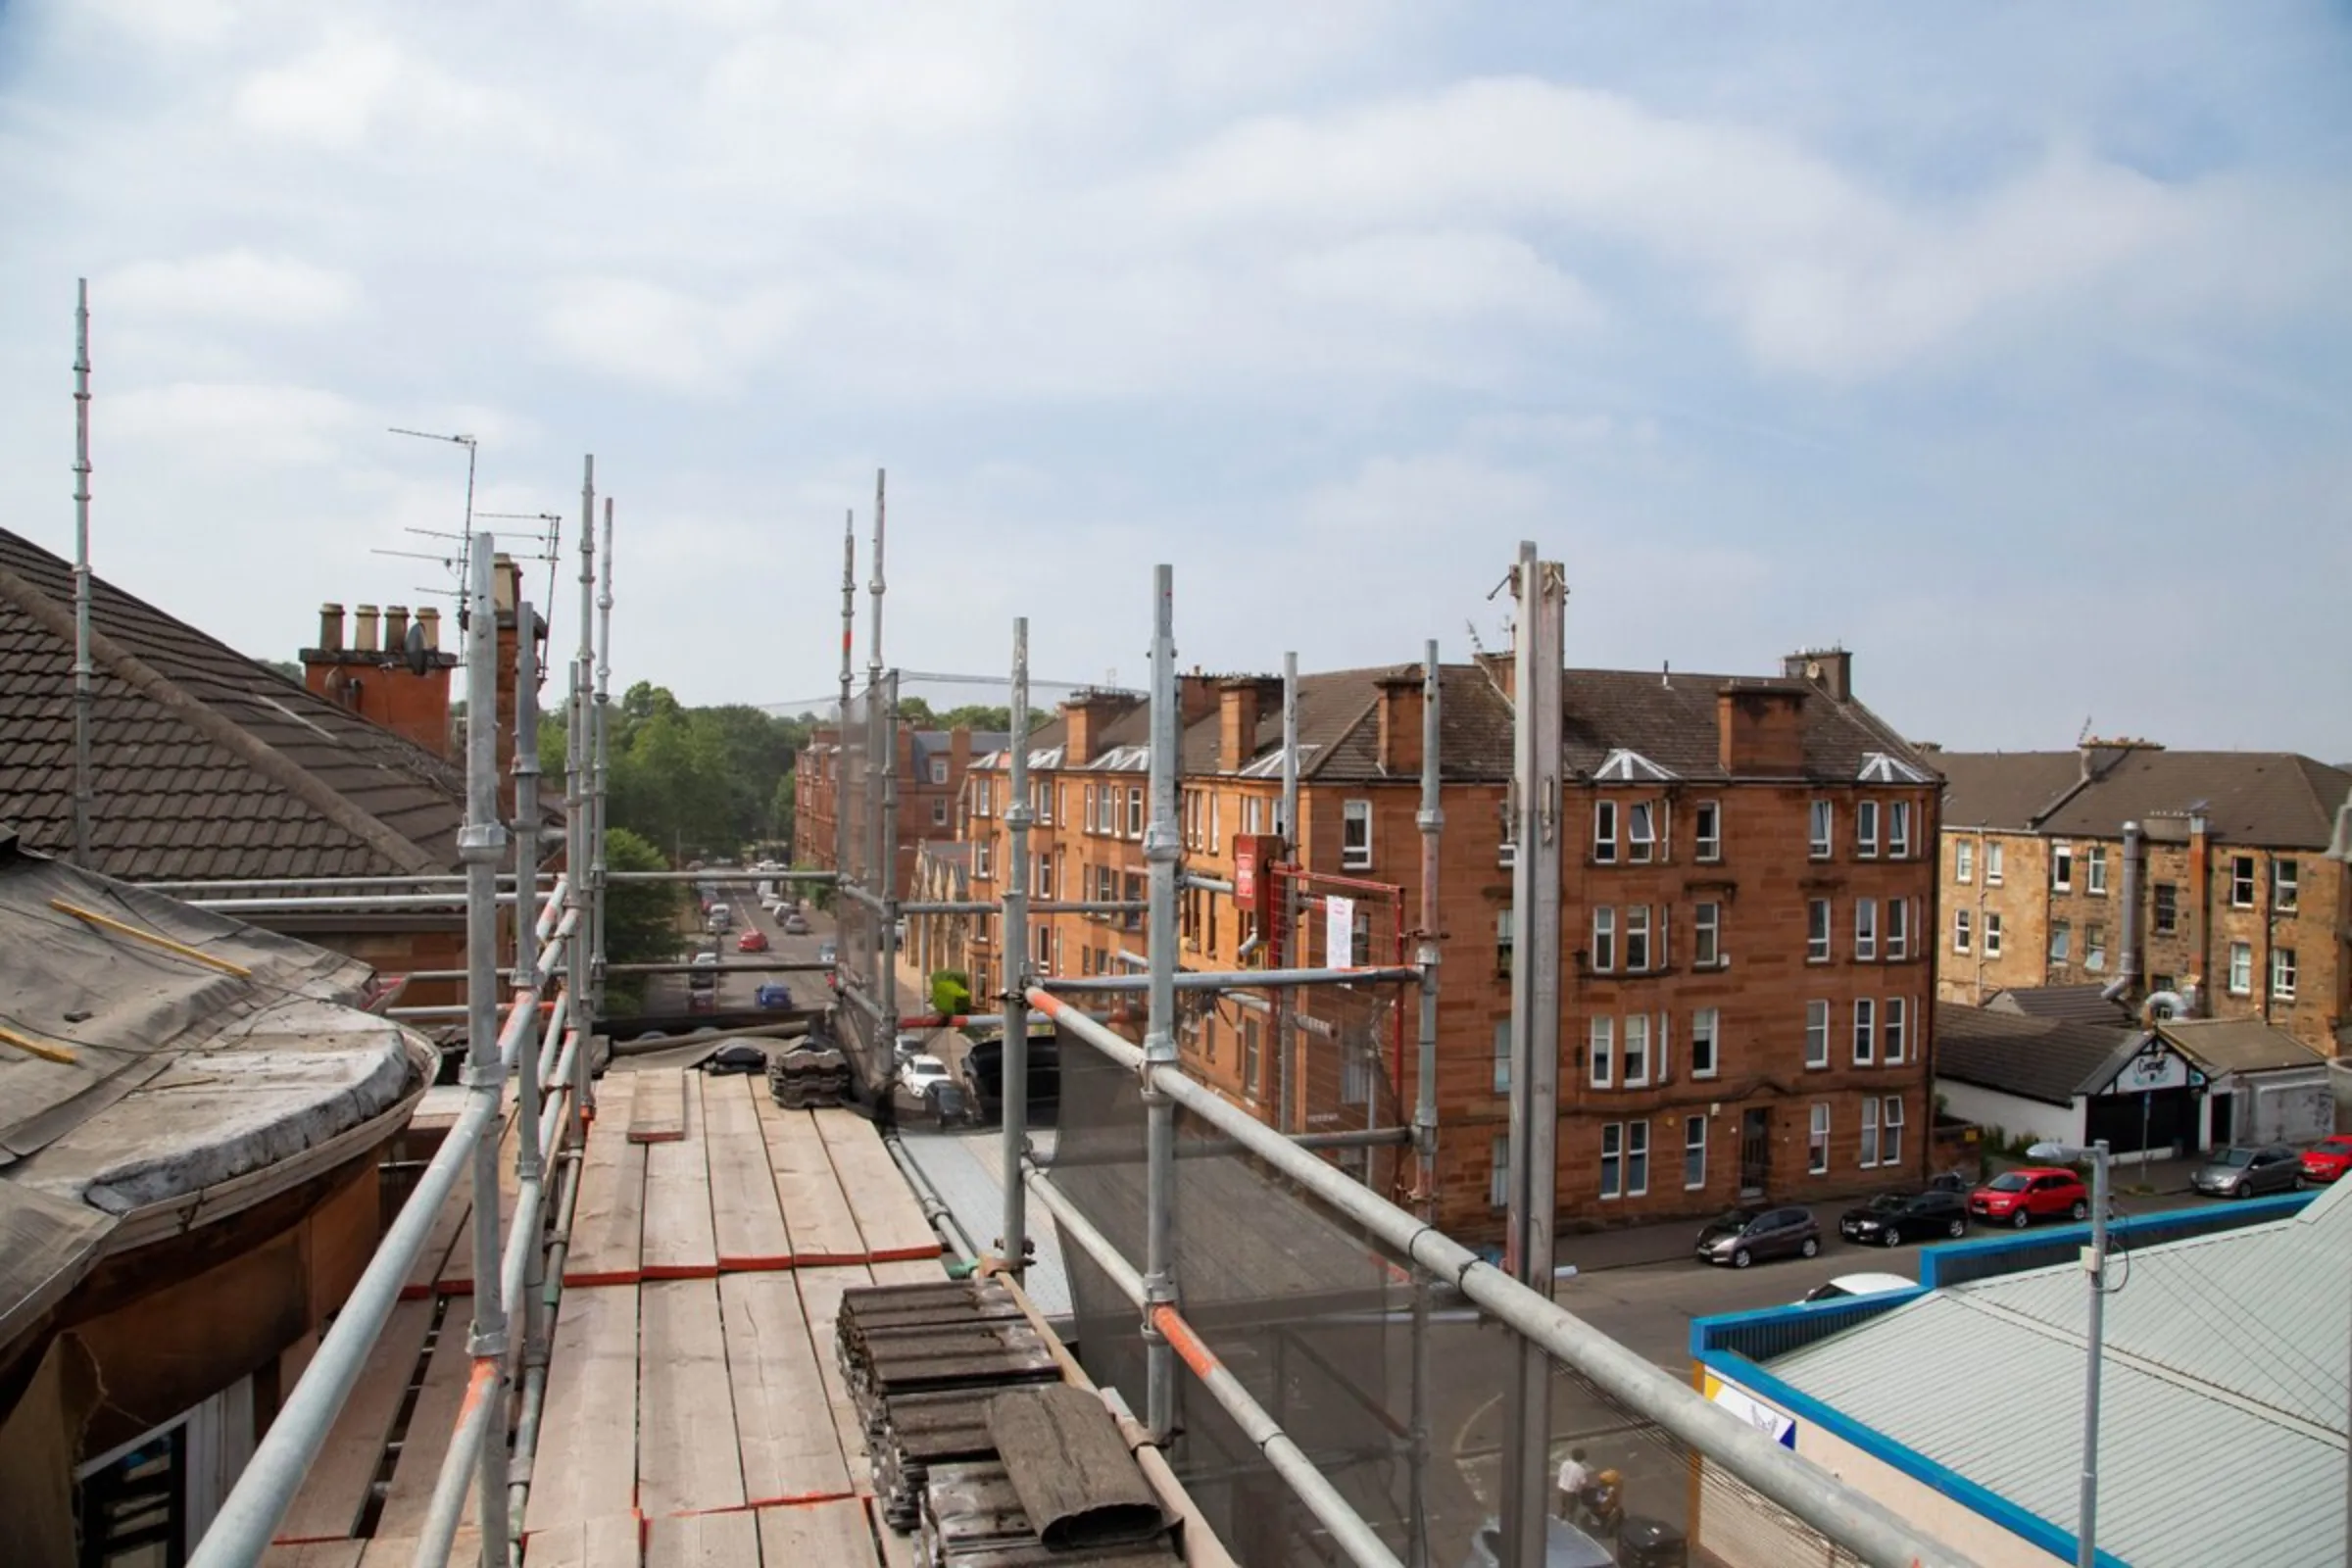 Blocks of red and blonde sandstone tenements are pictured from a scaffolding in Glasgow, United Kingdom, July 23, 2021. Tenement flats built in the 19th and 20th centuries are a key part of Glasgow's architectural heritage, but are hard to bring up to energy efficiency standards